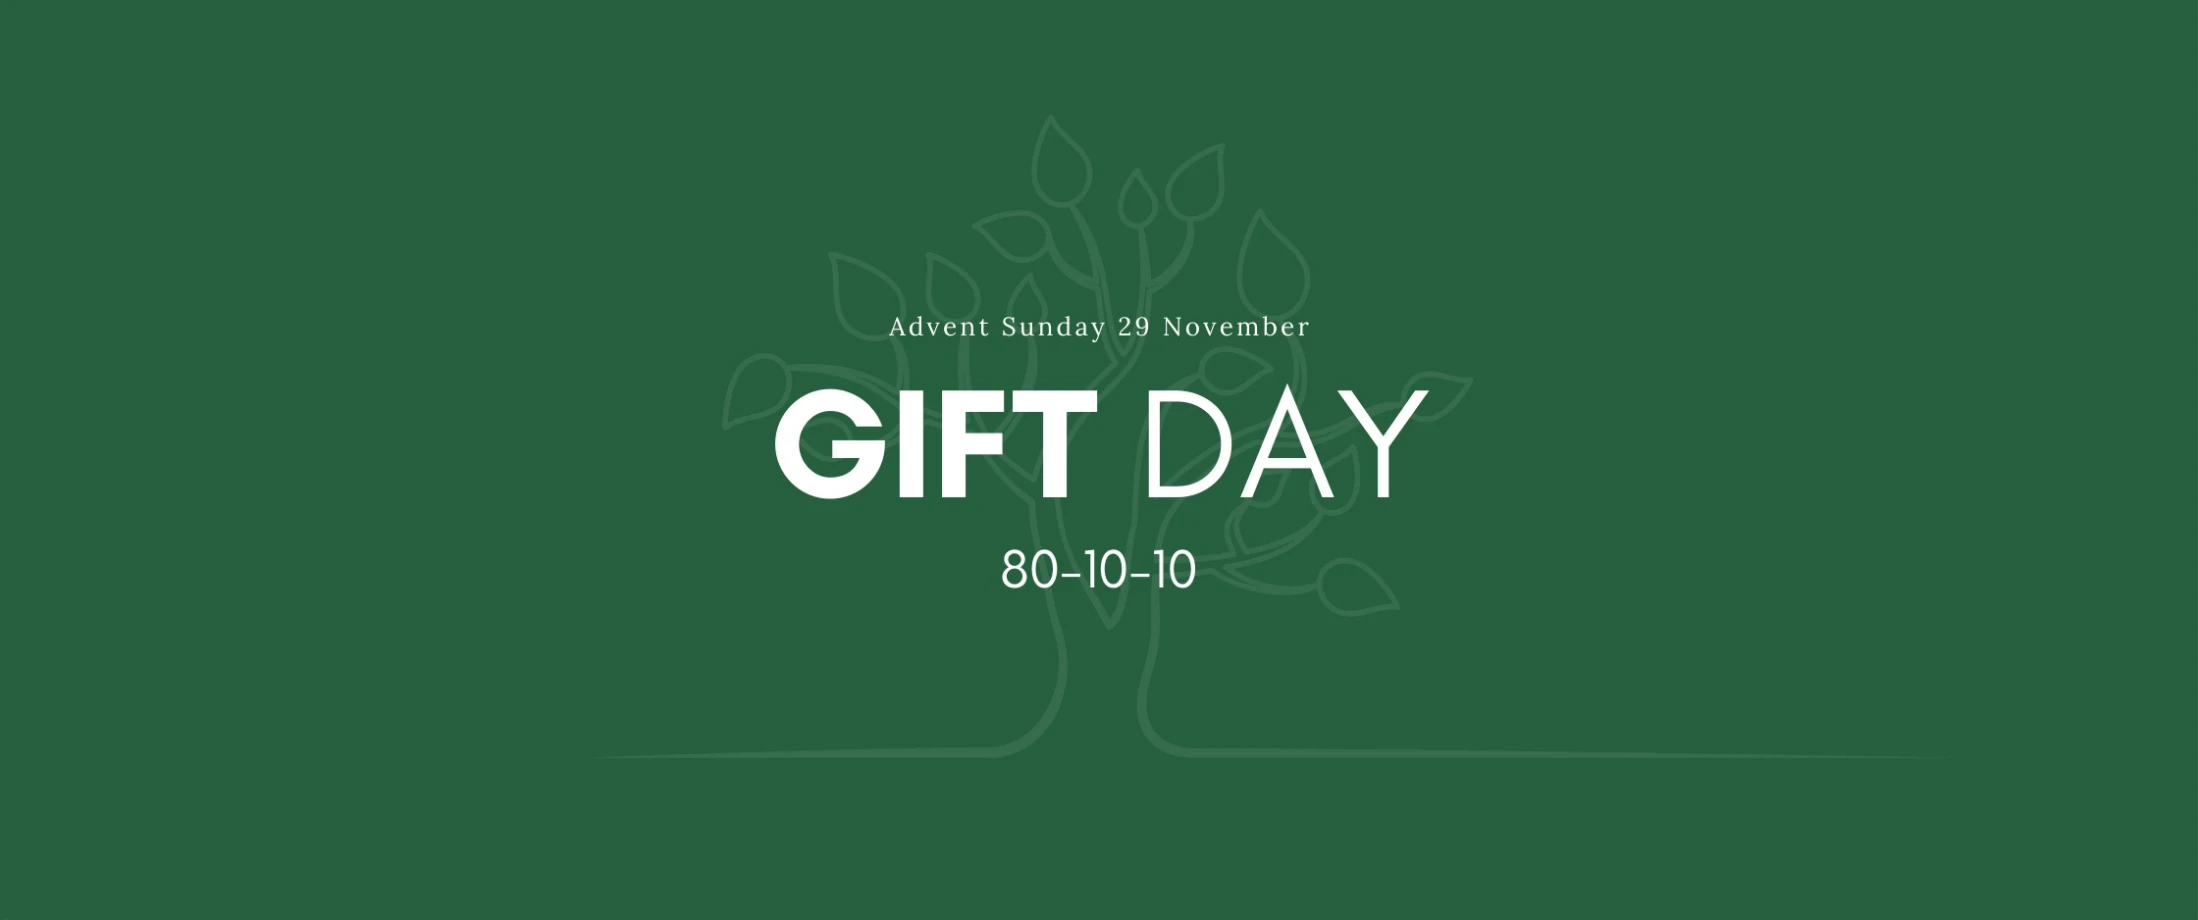 Advent Gift Day – a short message from Bishop David